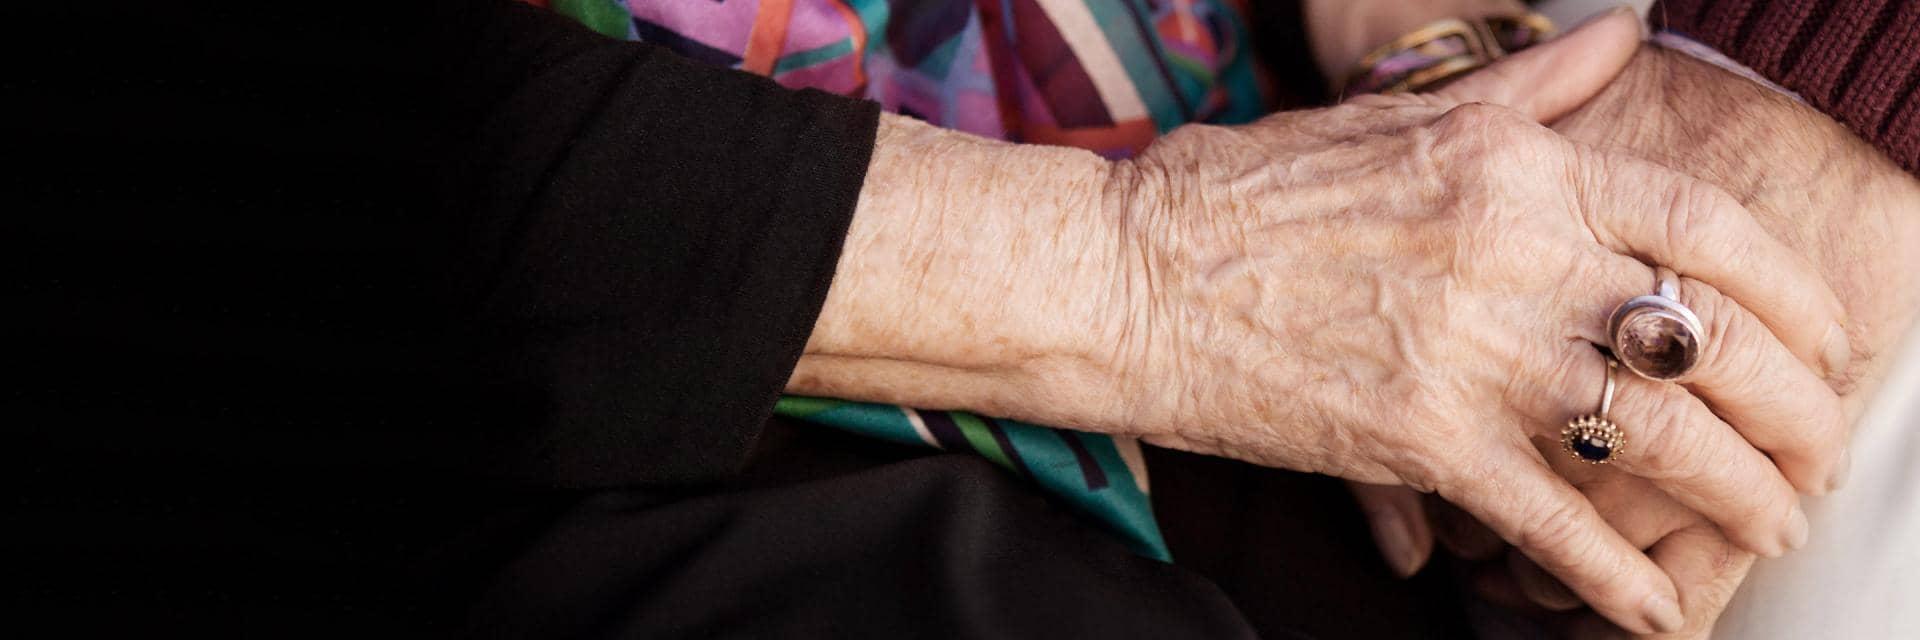  A person holds the hand of an elderly woman who is wearing rings on her fingers
